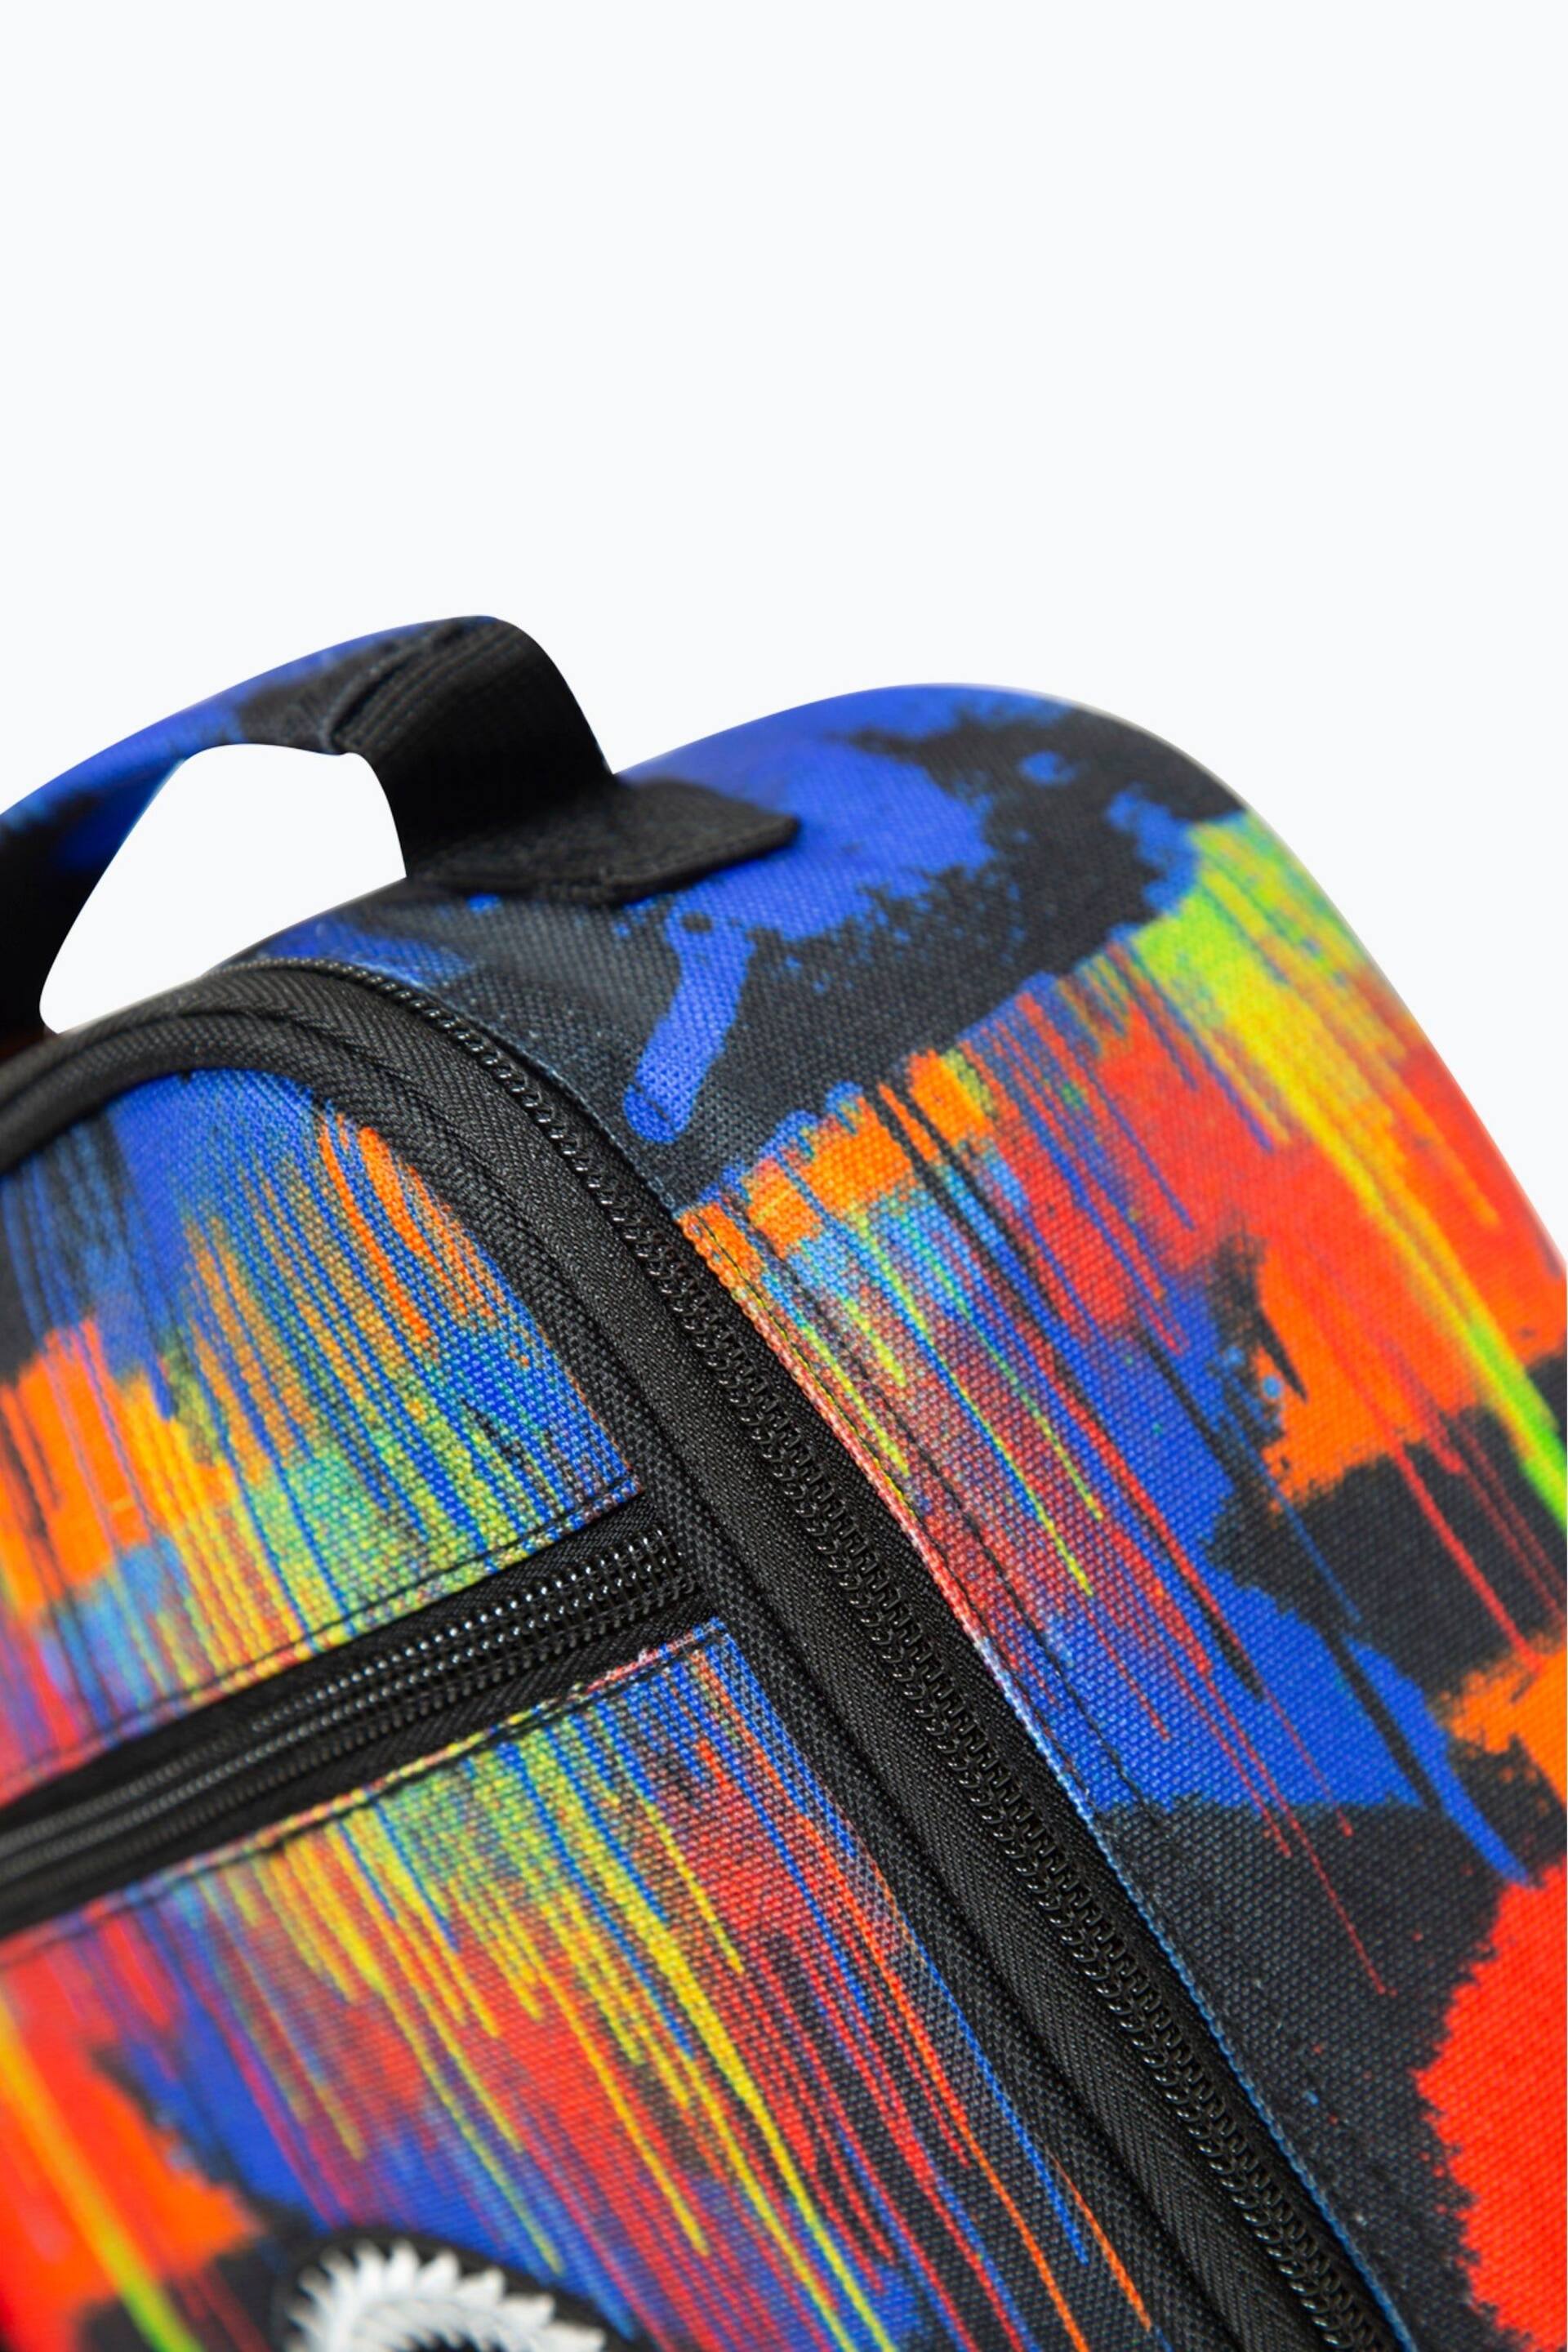 Hype. Multi Spray Paint Lunch Box - Image 6 of 8